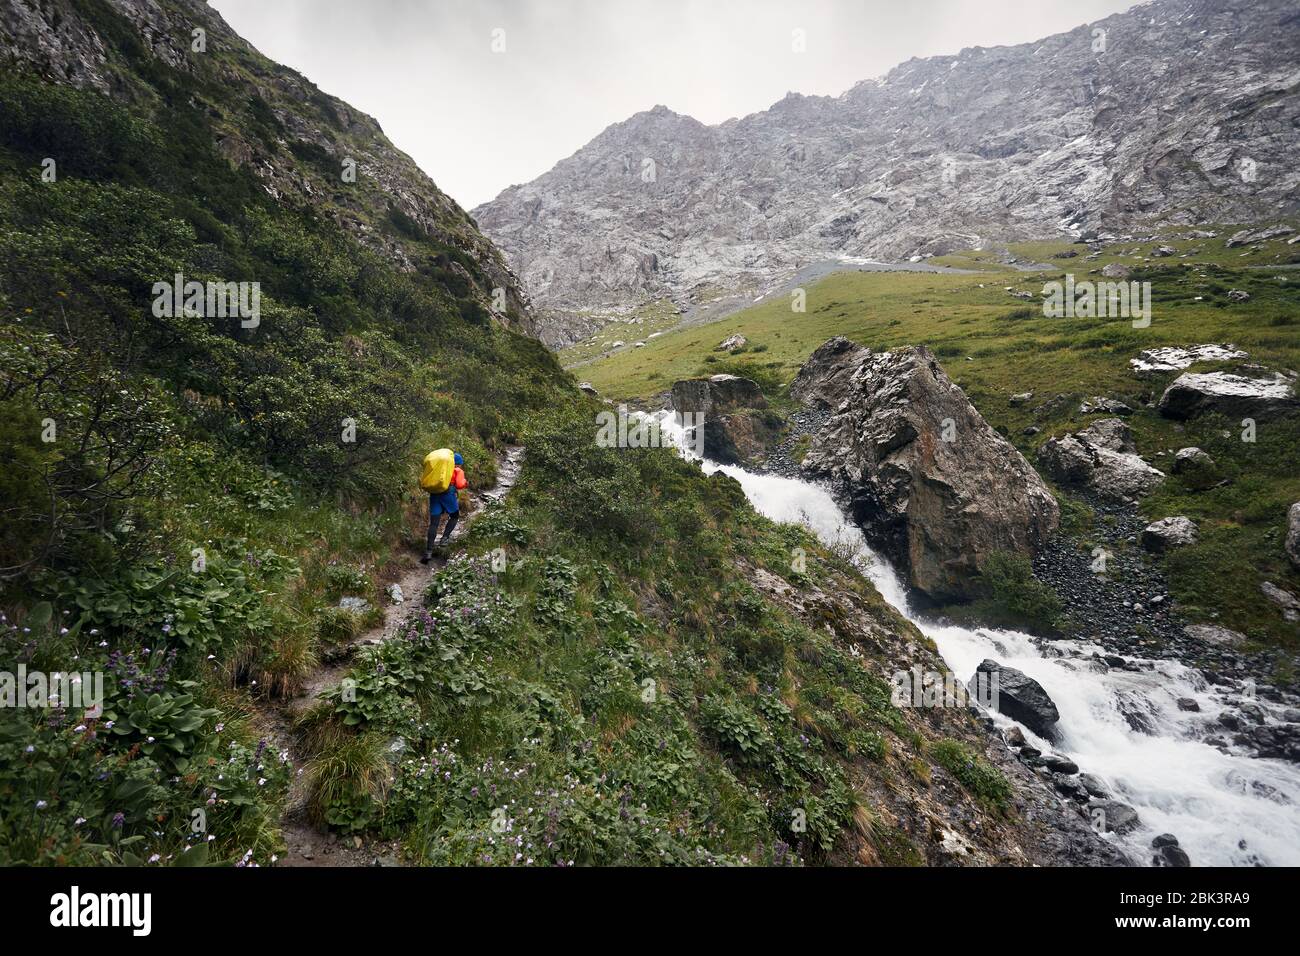 Hiker with yellow backpack in the mountain valley with river and rocky mountains in Karakol national park, Kyrgyzstan Stock Photo